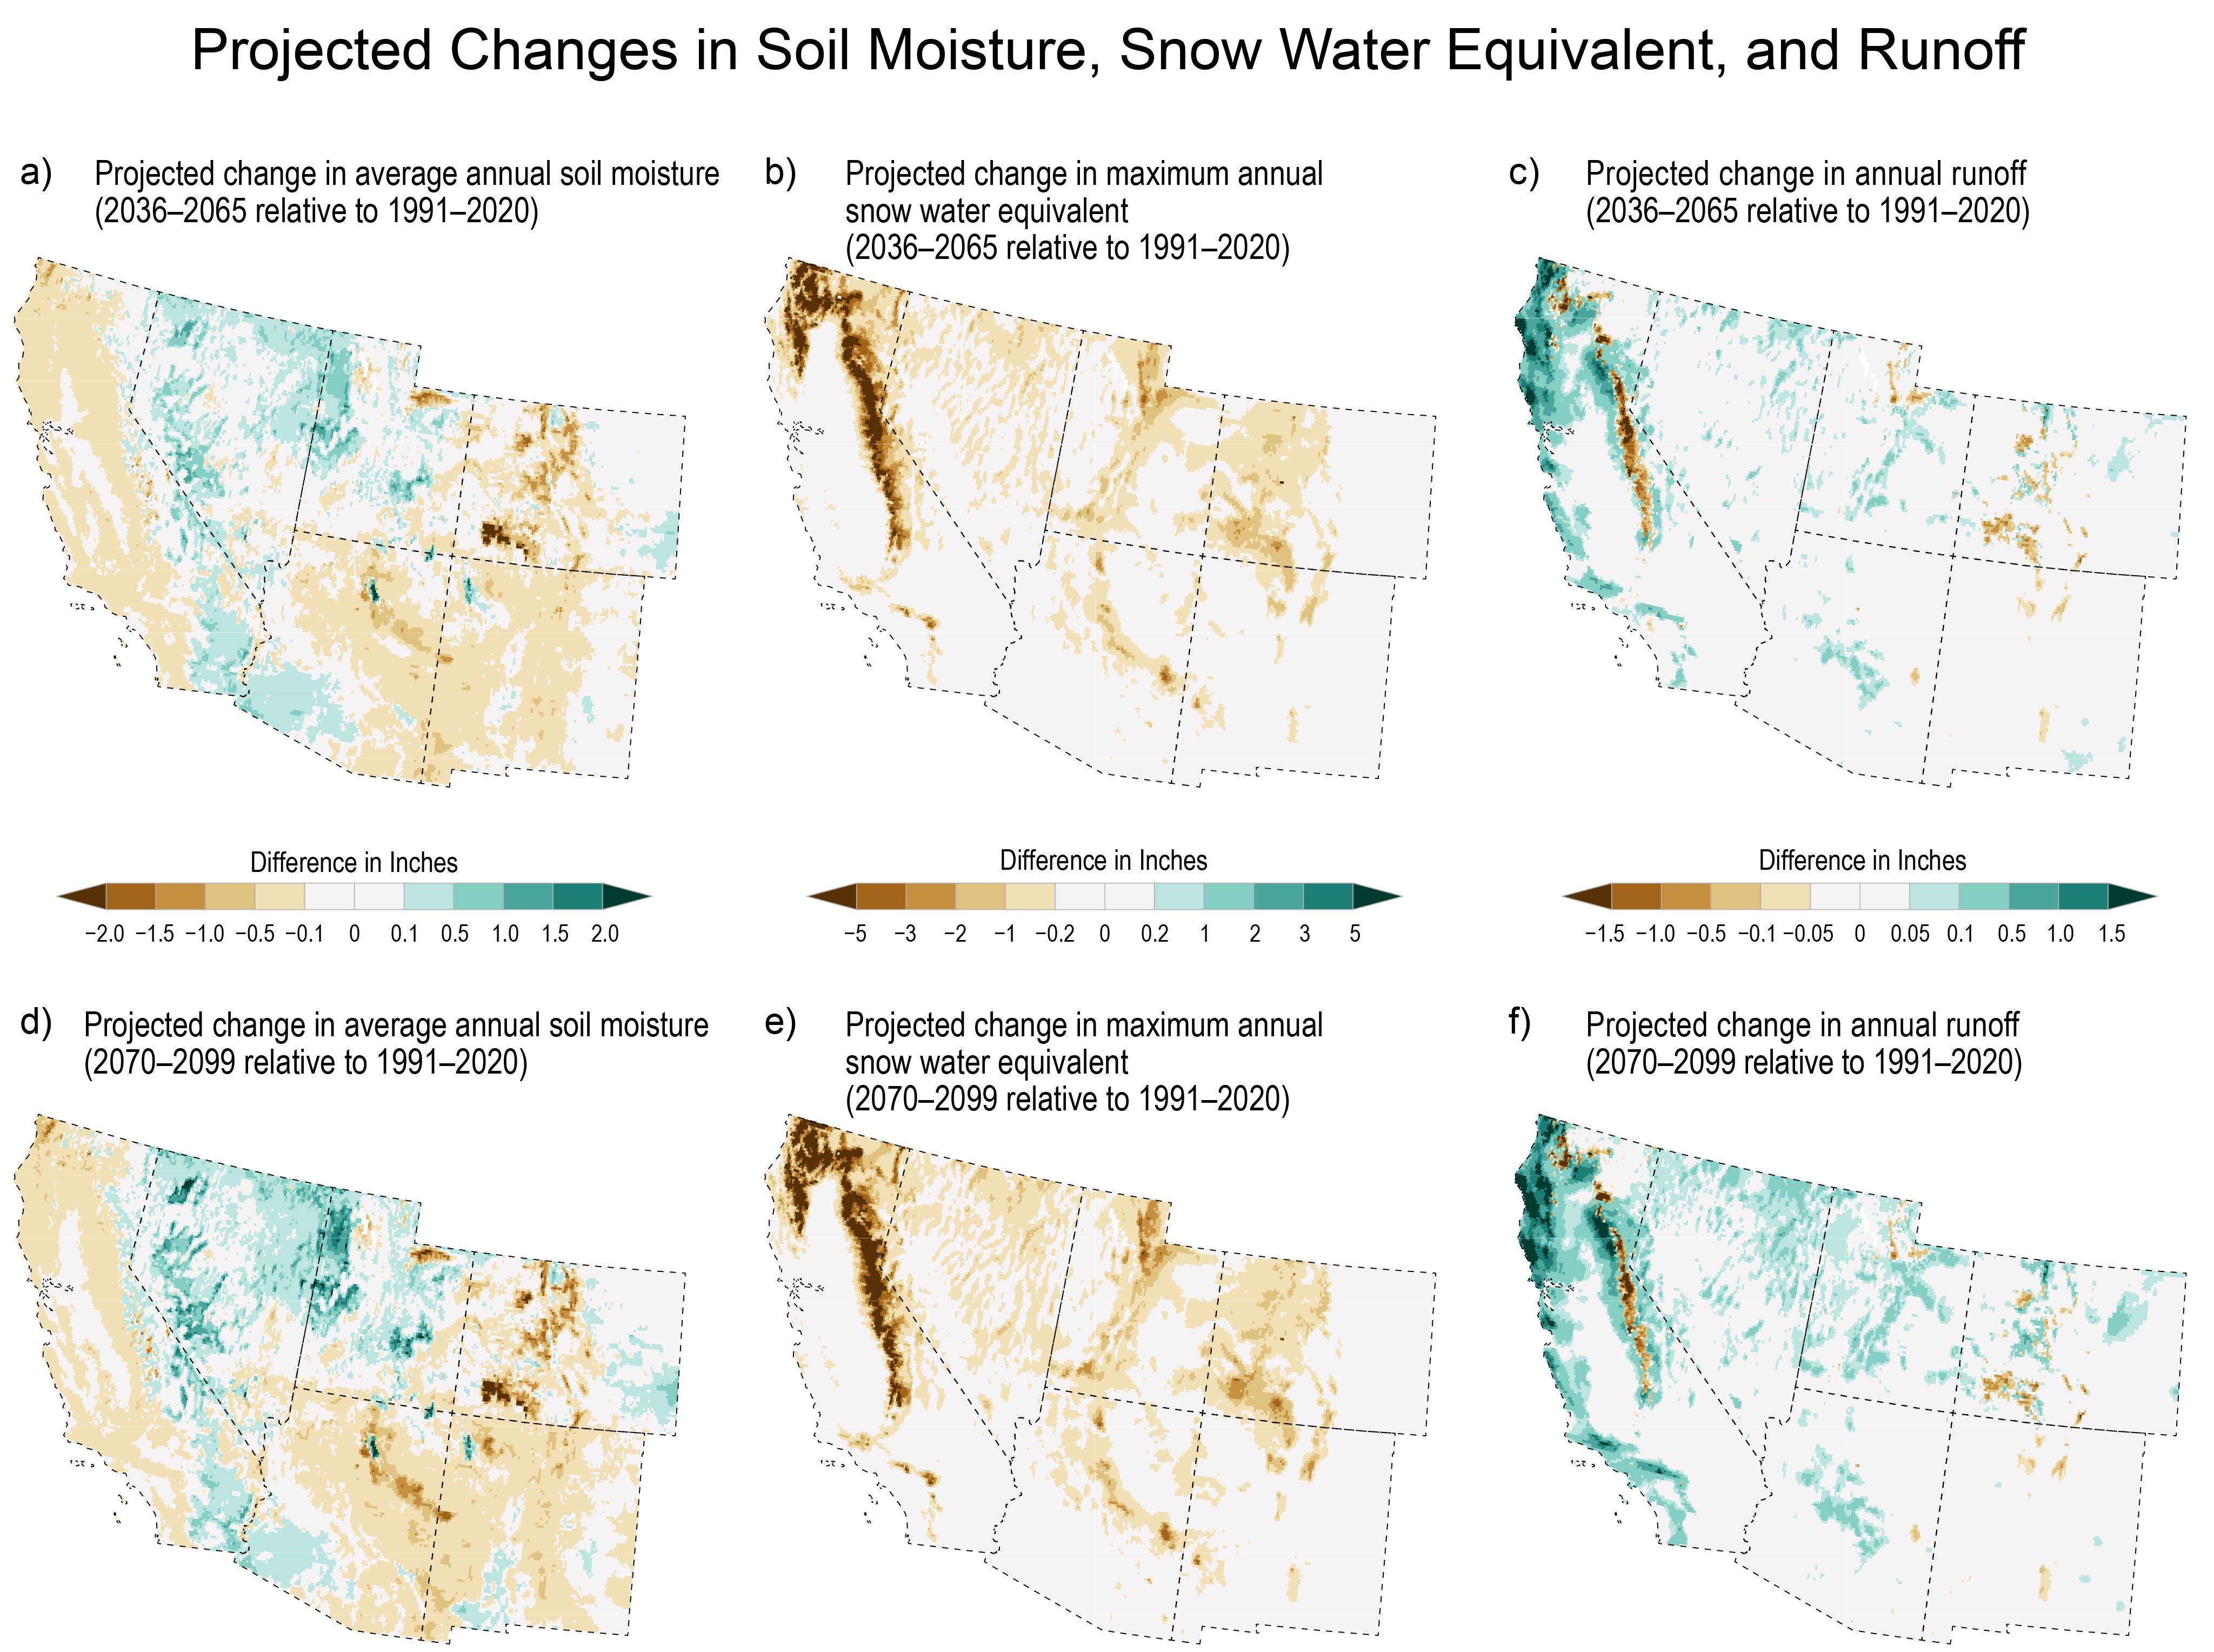 Projected Changes in Soil Moisture, Snow Water Equivalent, and Runoff